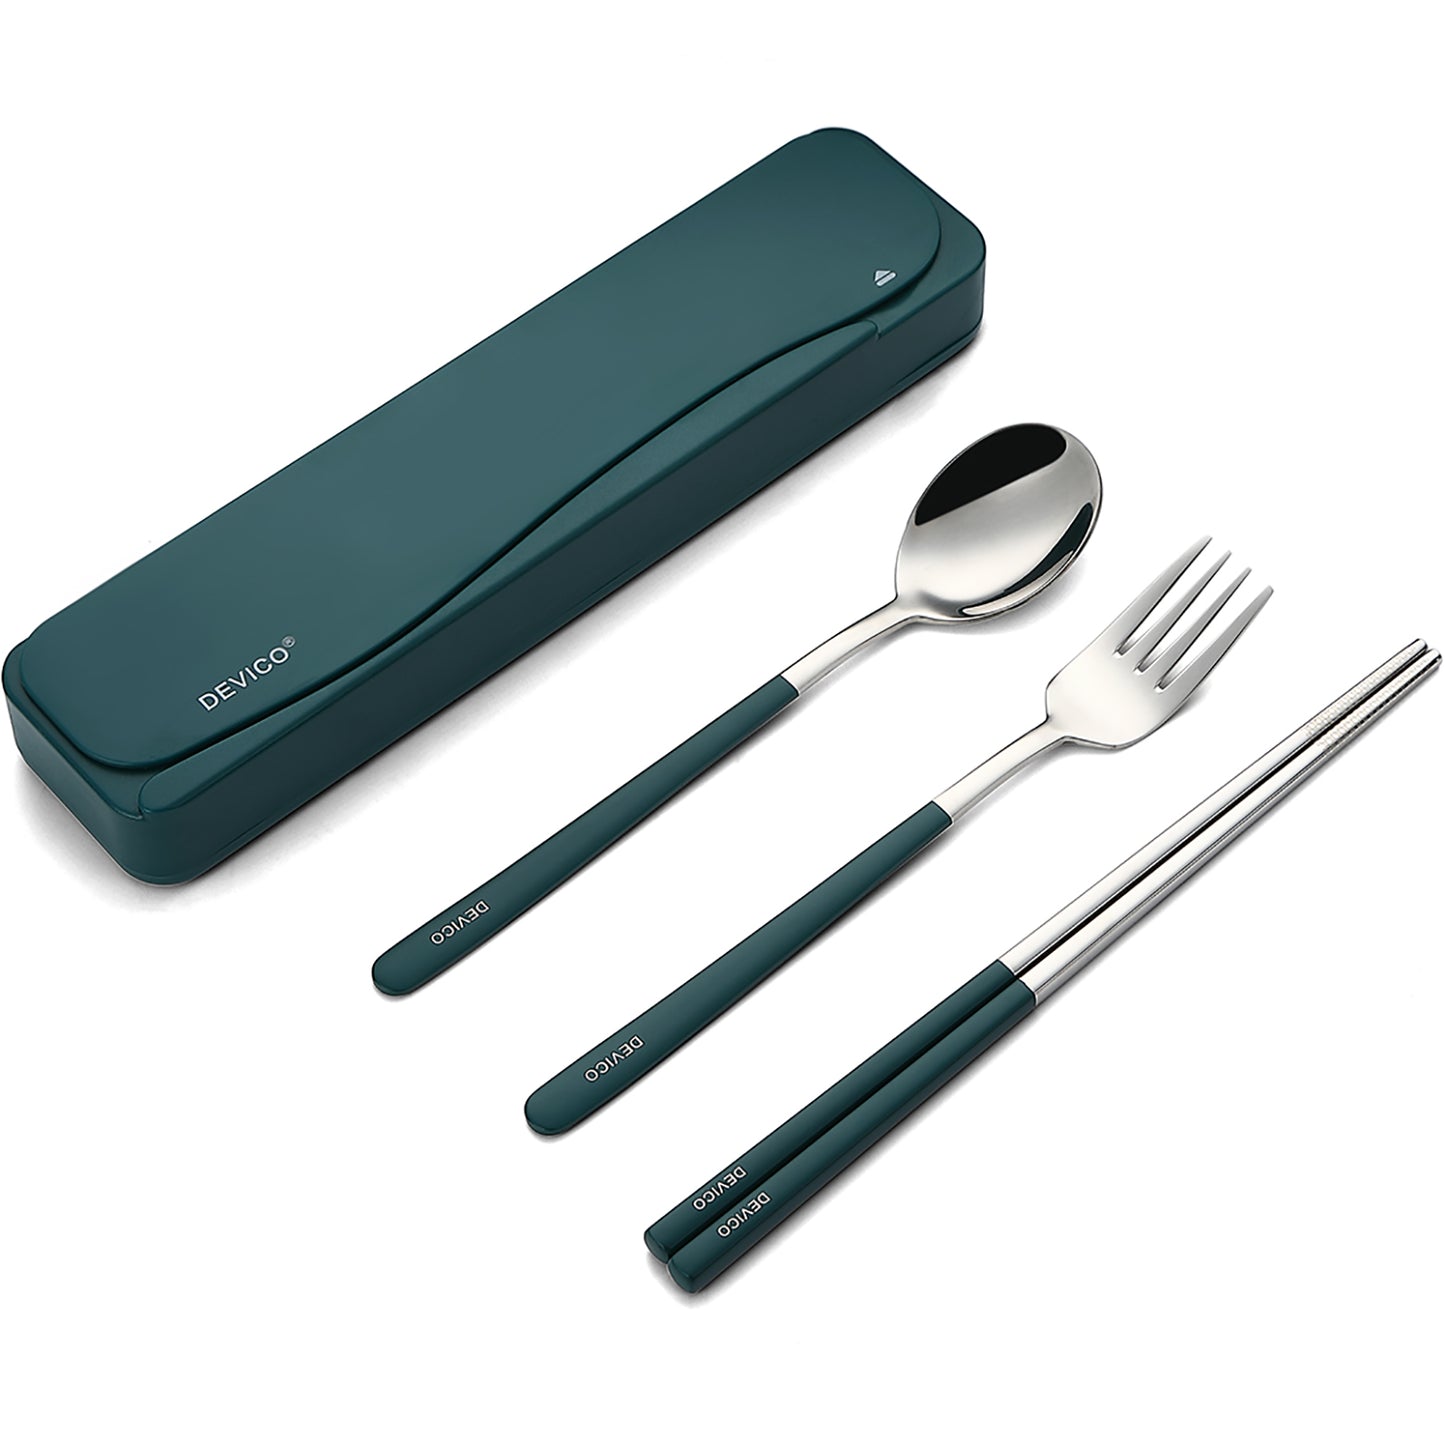 DEVICO Travel Utensils, 18/8 Stainless Steel Portable Reusable Camping Silverware Cutlery Flatware Set, 4-Piece Include Fork Spoon Chopsticks with Case (Dark Green)